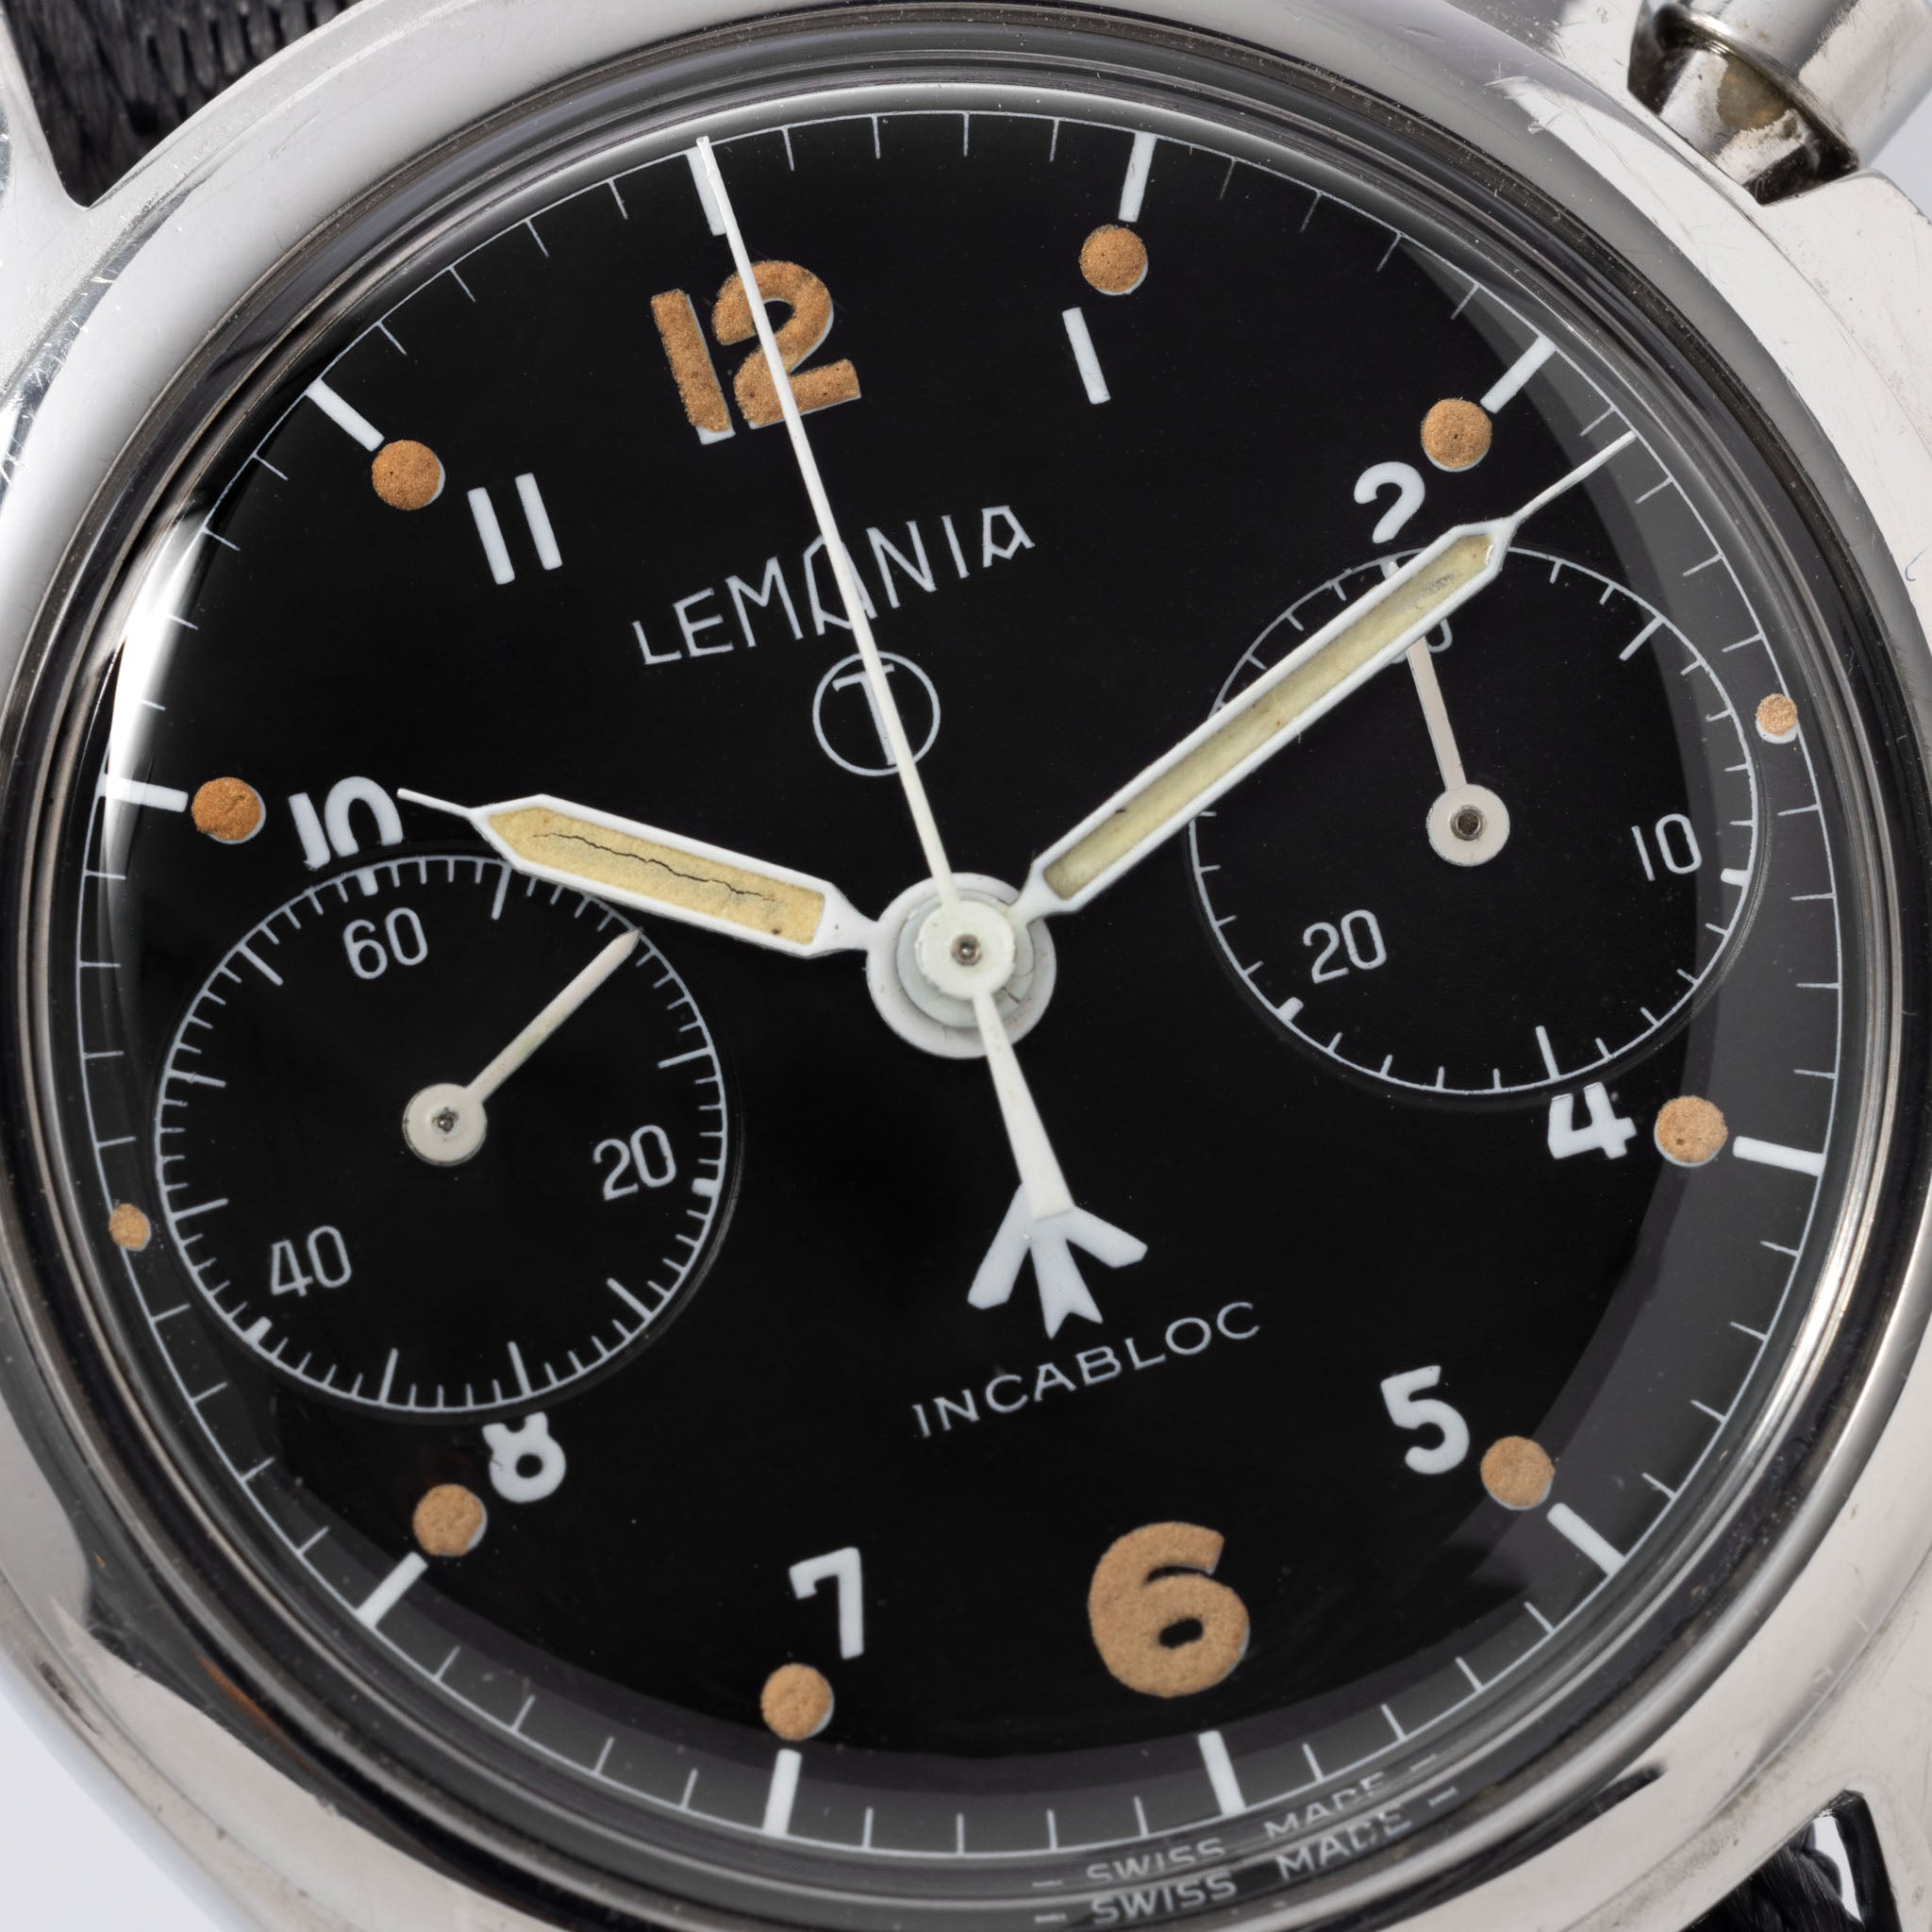 Lemania Monopusher Chronograph "British Armed Forces Issued"